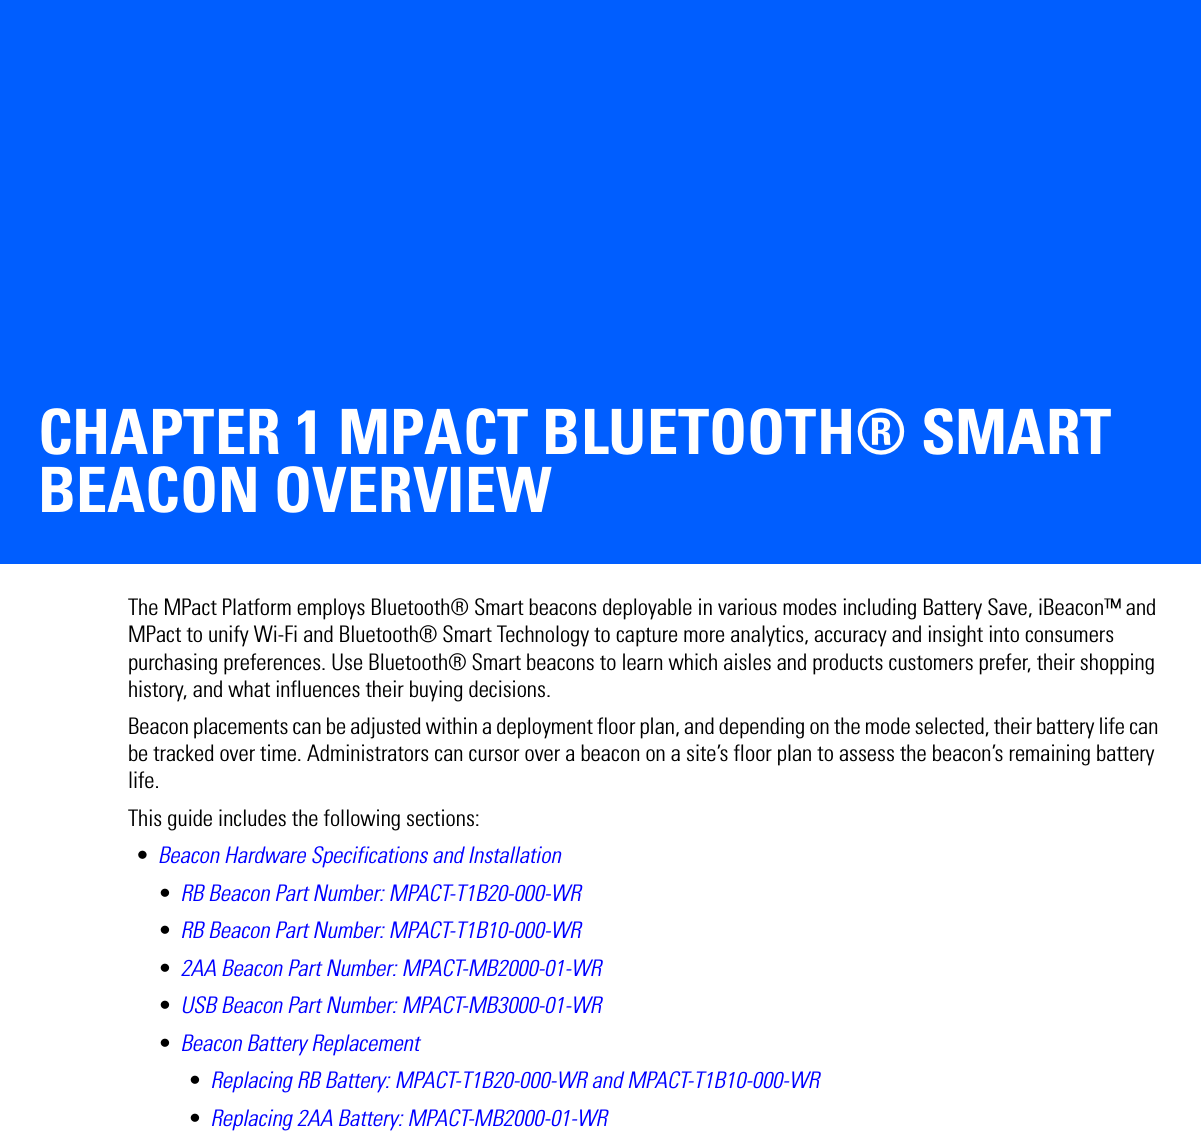 CHAPTER 1 MPACT BLUETOOTH® SMART BEACON OVERVIEWThe MPact Platform employs Bluetooth® Smart beacons deployable in various modes including Battery Save, iBeacon™ and MPact to unify Wi-Fi and Bluetooth® Smart Technology to capture more analytics, accuracy and insight into consumers purchasing preferences. Use Bluetooth® Smart beacons to learn which aisles and products customers prefer, their shopping history, and what influences their buying decisions.Beacon placements can be adjusted within a deployment floor plan, and depending on the mode selected, their battery life can be tracked over time. Administrators can cursor over a beacon on a site’s floor plan to assess the beacon’s remaining battery life.This guide includes the following sections: •Beacon Hardware Specifications and Installation•RB Beacon Part Number: MPACT-T1B20-000-WR•RB Beacon Part Number: MPACT-T1B10-000-WR•2AA Beacon Part Number: MPACT-MB2000-01-WR•USB Beacon Part Number: MPACT-MB3000-01-WR•Beacon Battery Replacement•Replacing RB Battery: MPACT-T1B20-000-WR and MPACT-T1B10-000-WR•Replacing 2AA Battery: MPACT-MB2000-01-WR